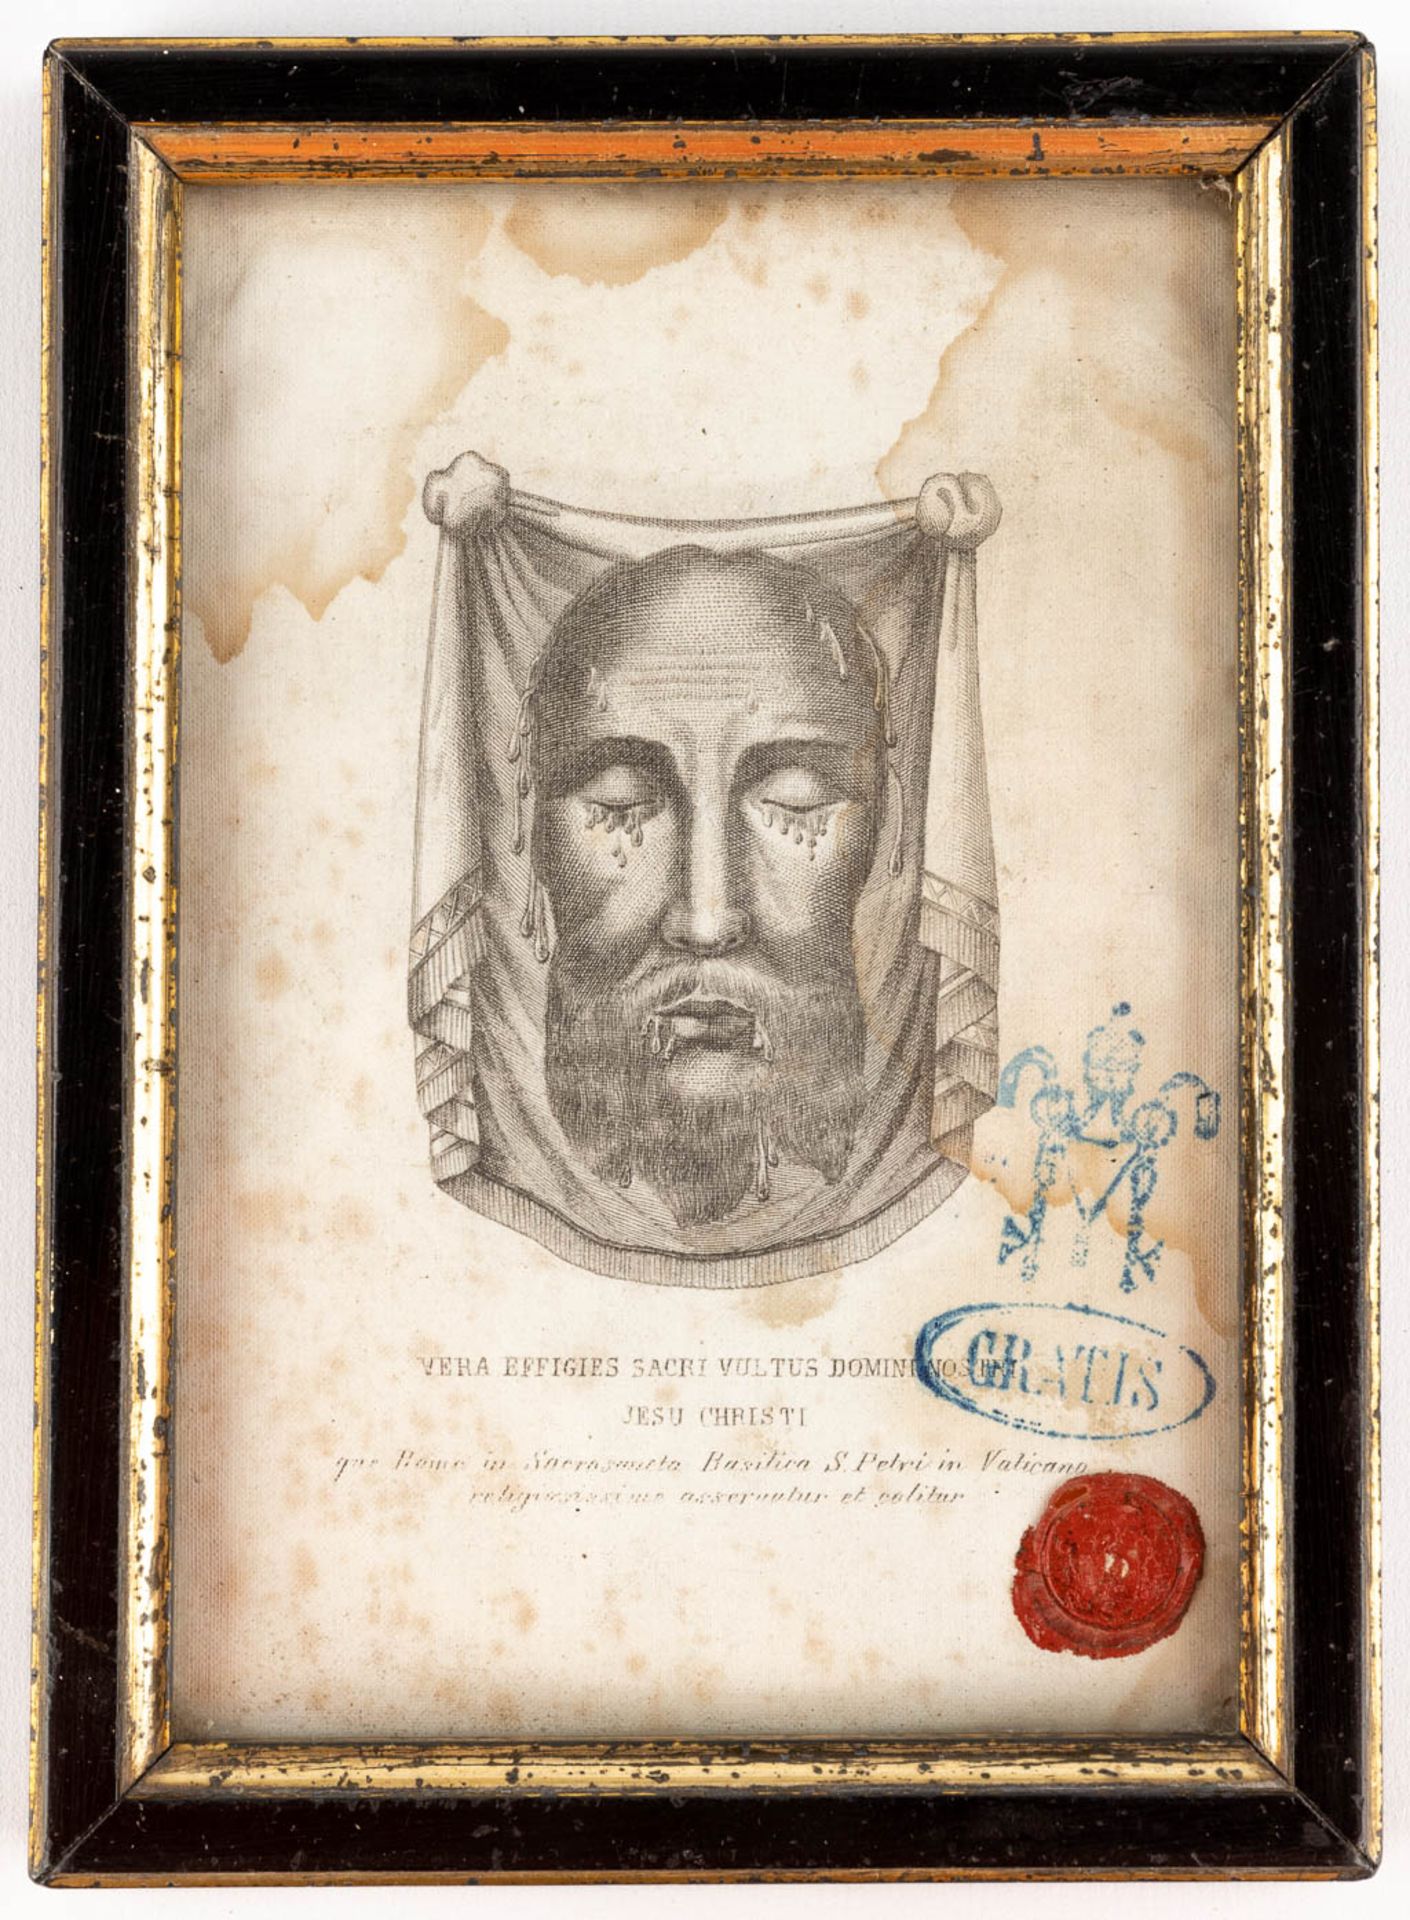 A small collection of relics and reliquary items, The Veil of Veronica, a relic in the shape of a sa - Image 9 of 11